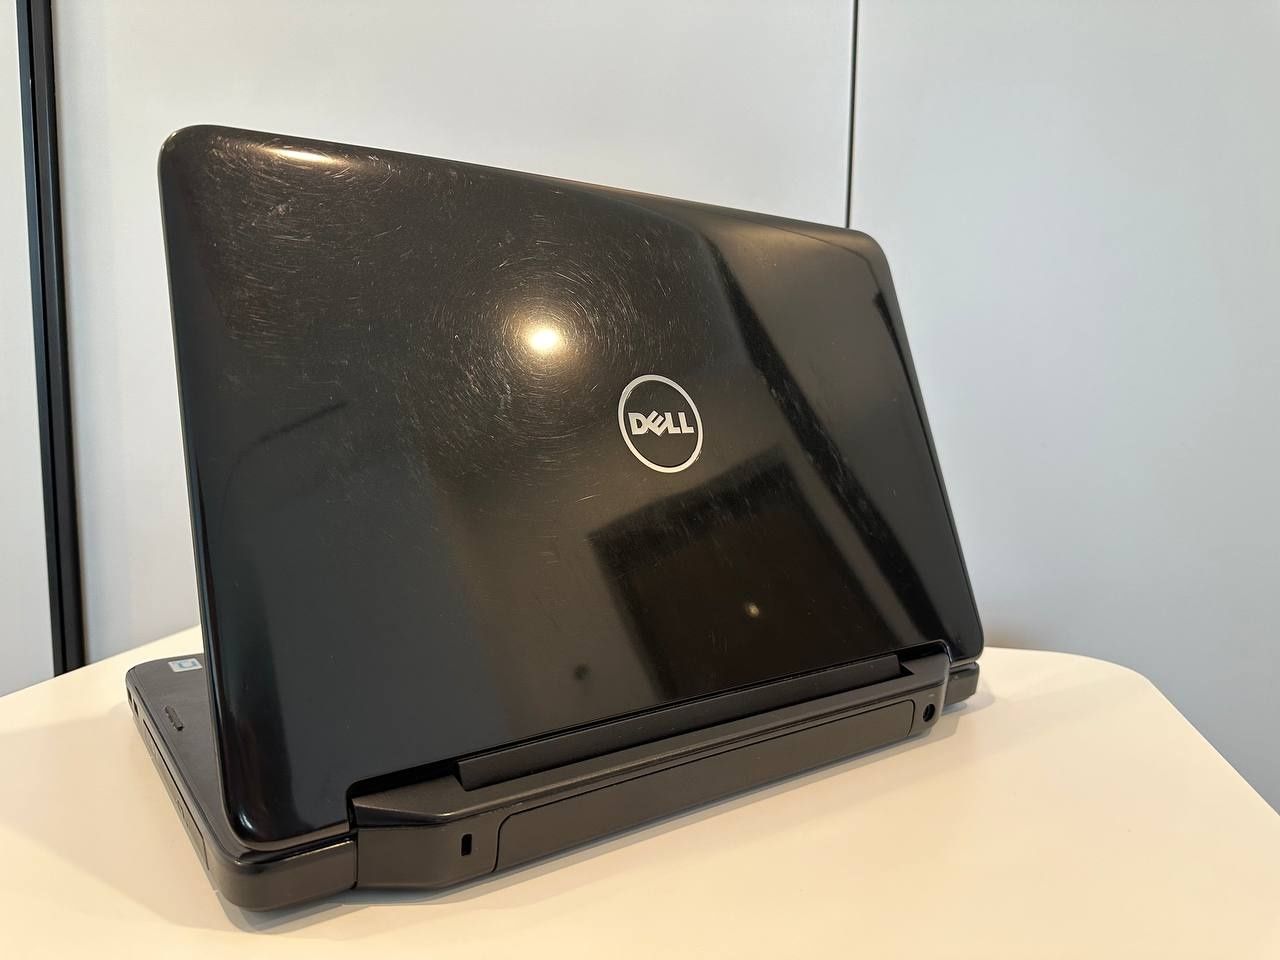 Dell Inspiron N5040